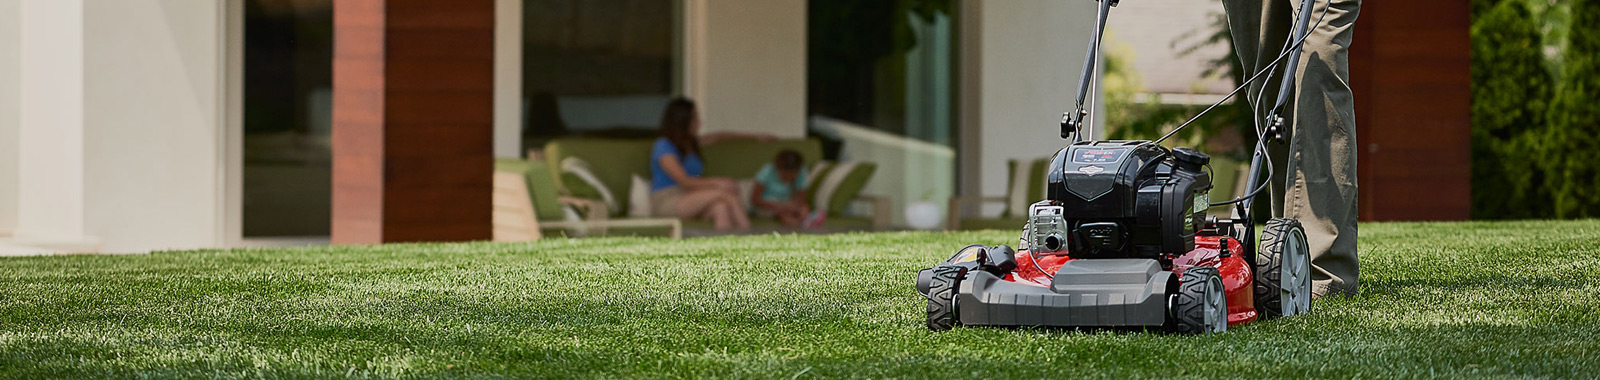 Choosing Your Briggs and Stratton Lawn Mower